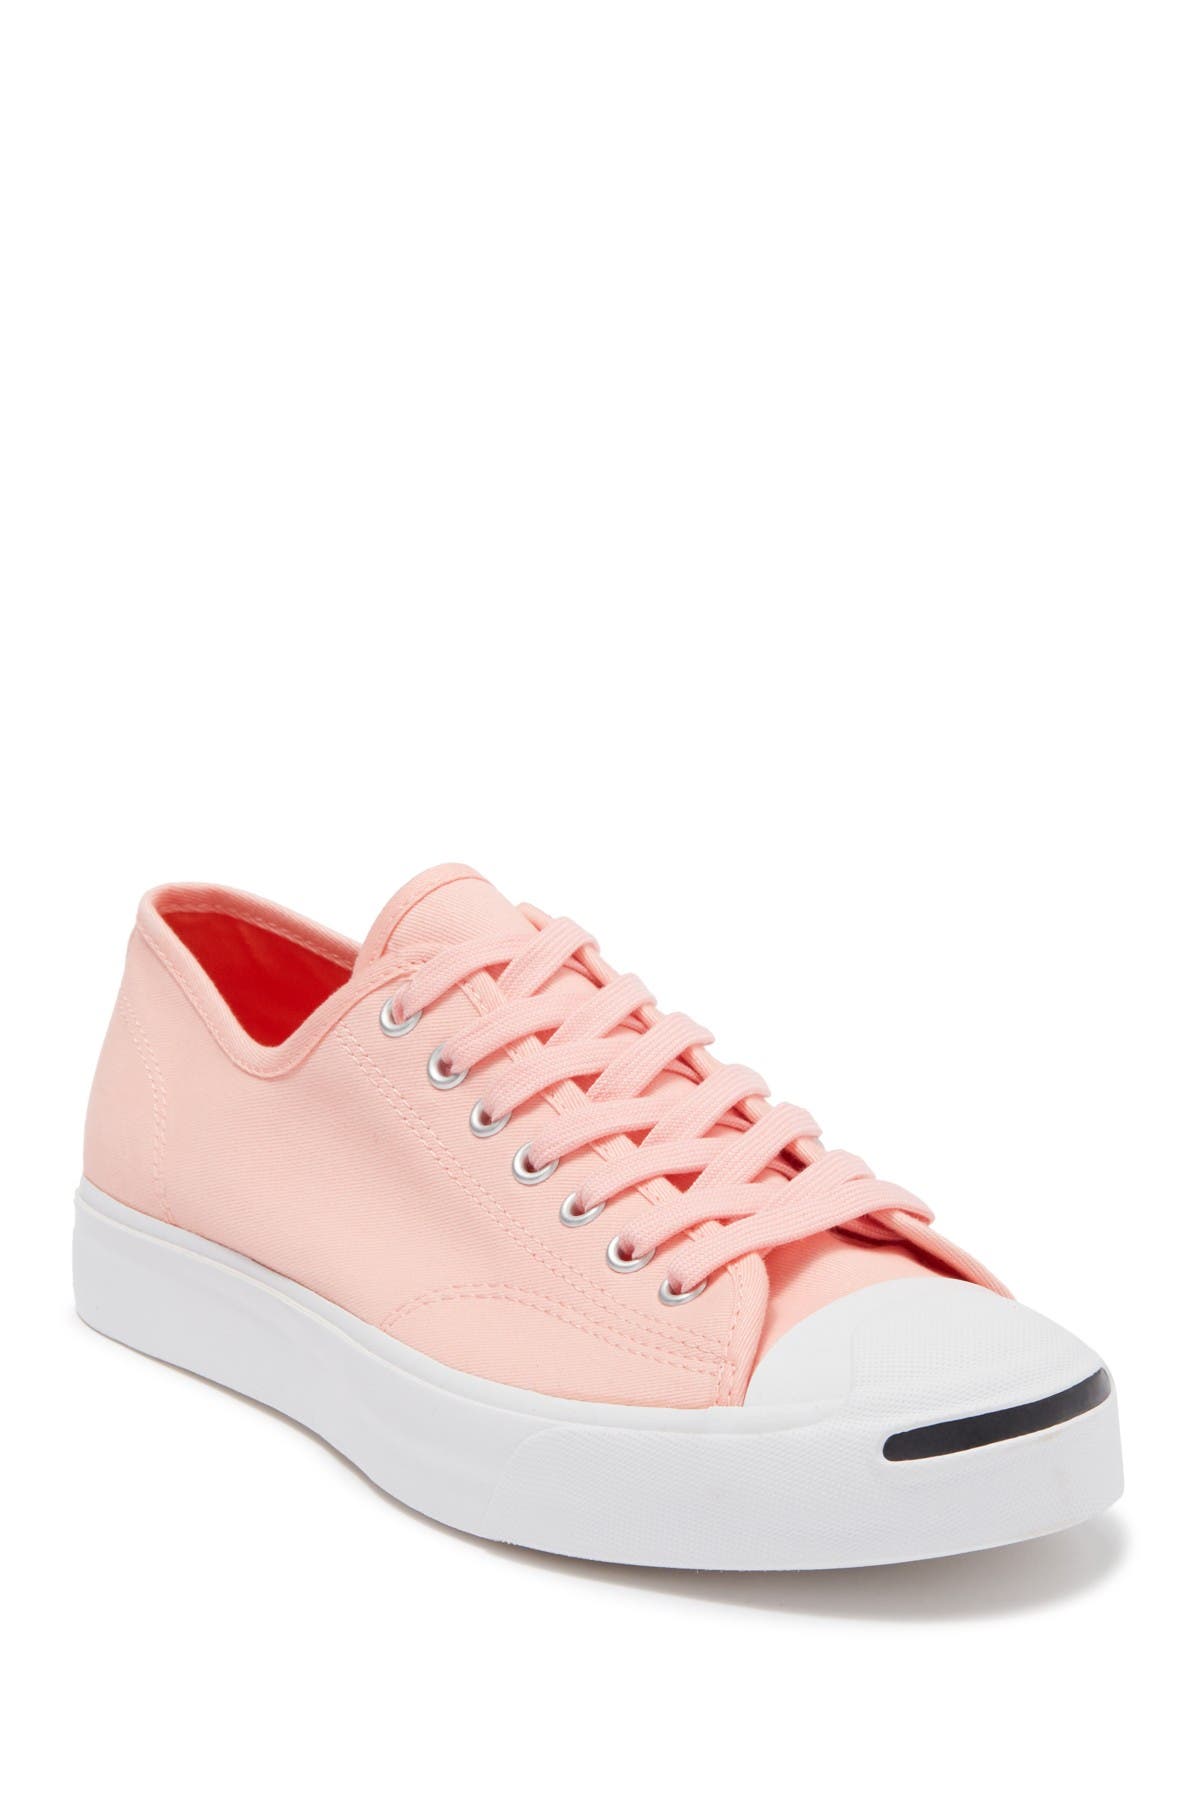 jack purcell shoes nordstrom